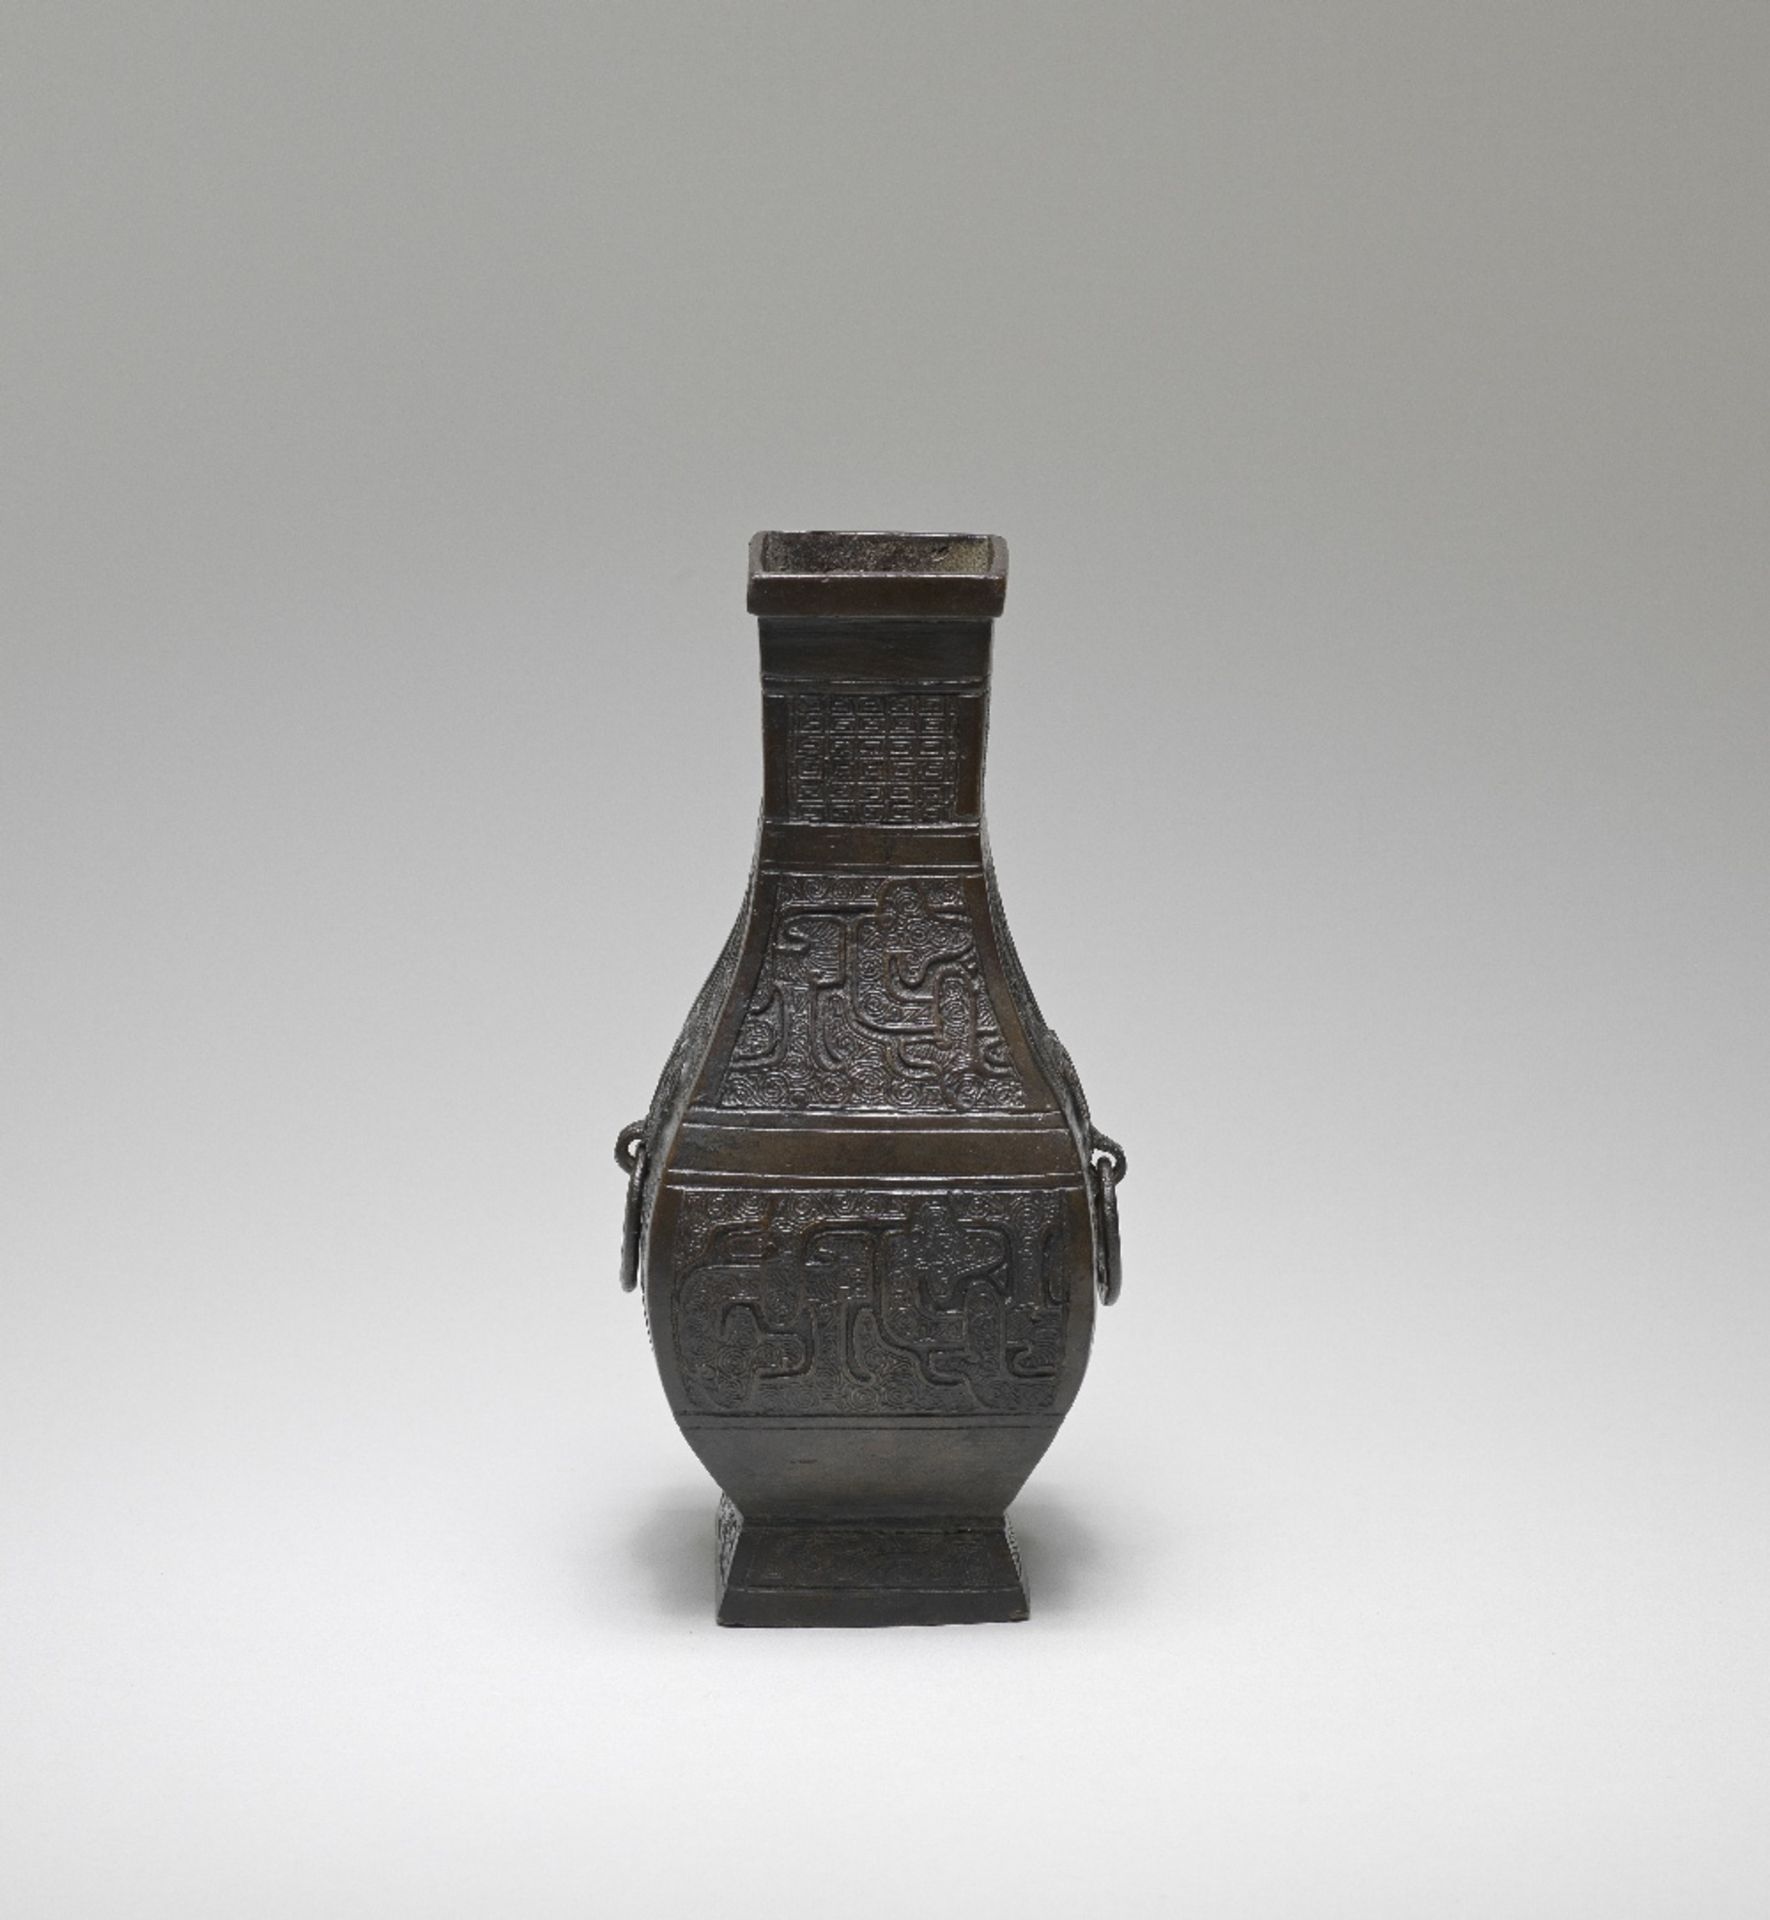 AN ARCHAISTIC BRONZE SQUARE PEAR-SHAPED VASE Yuan/Ming Dynasty